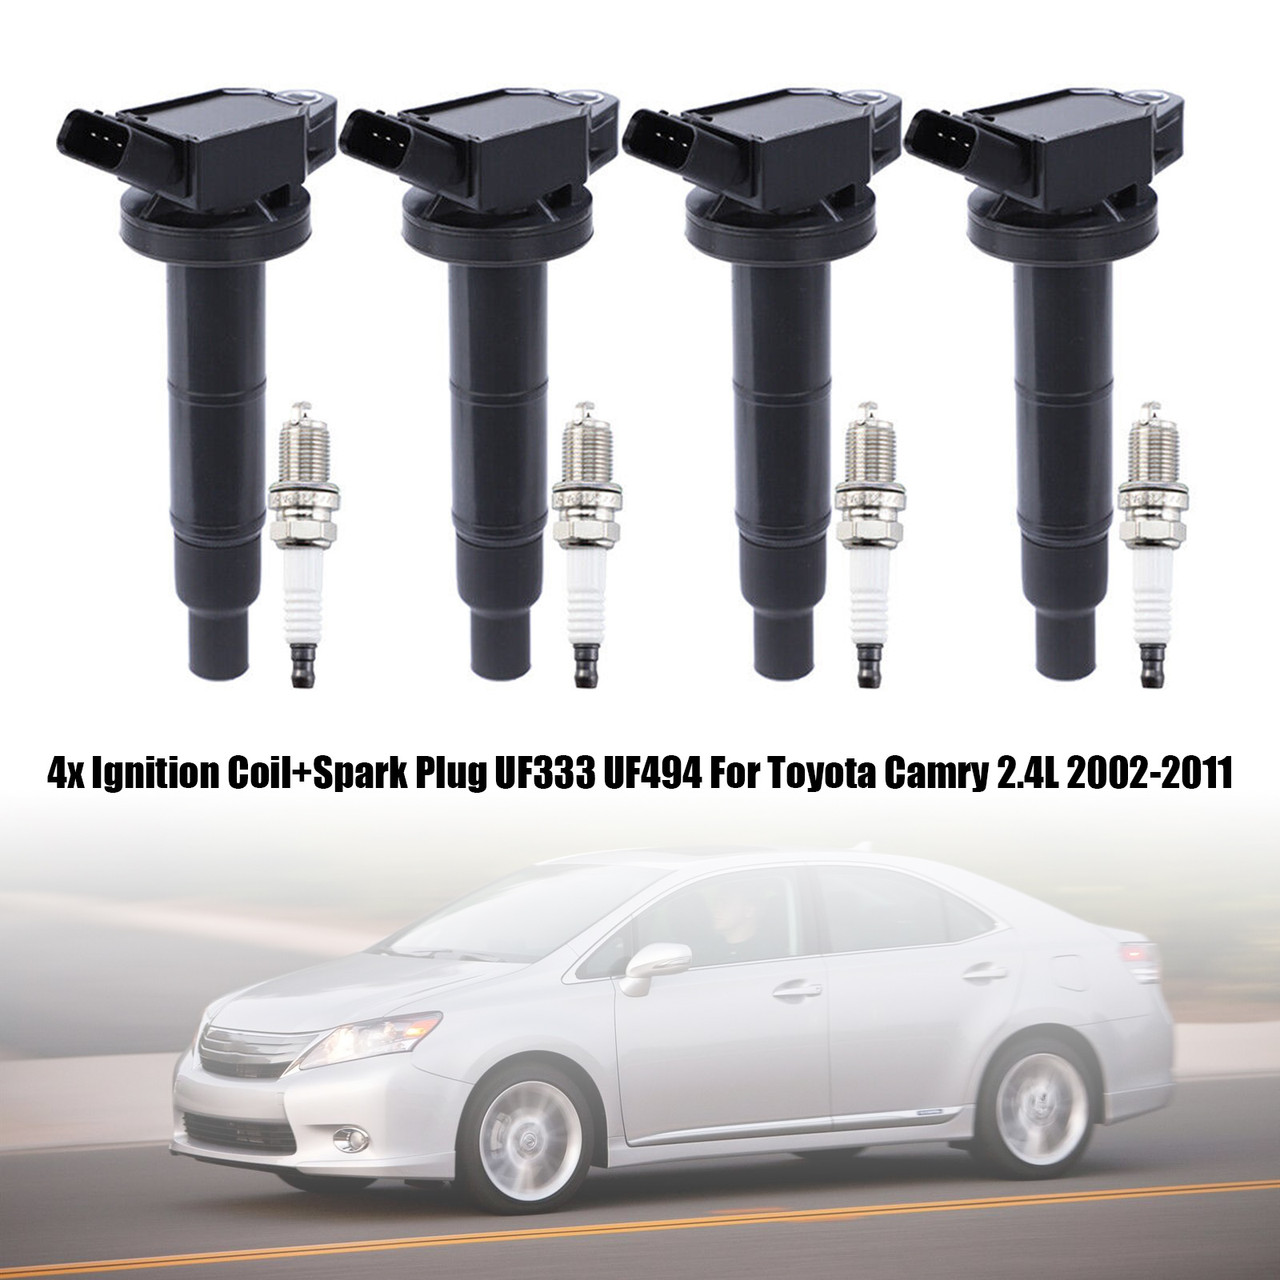 4x Ignition Coil+Spark Plug UF333 UF494 For Toyota Camry 2.4L 2002-2011